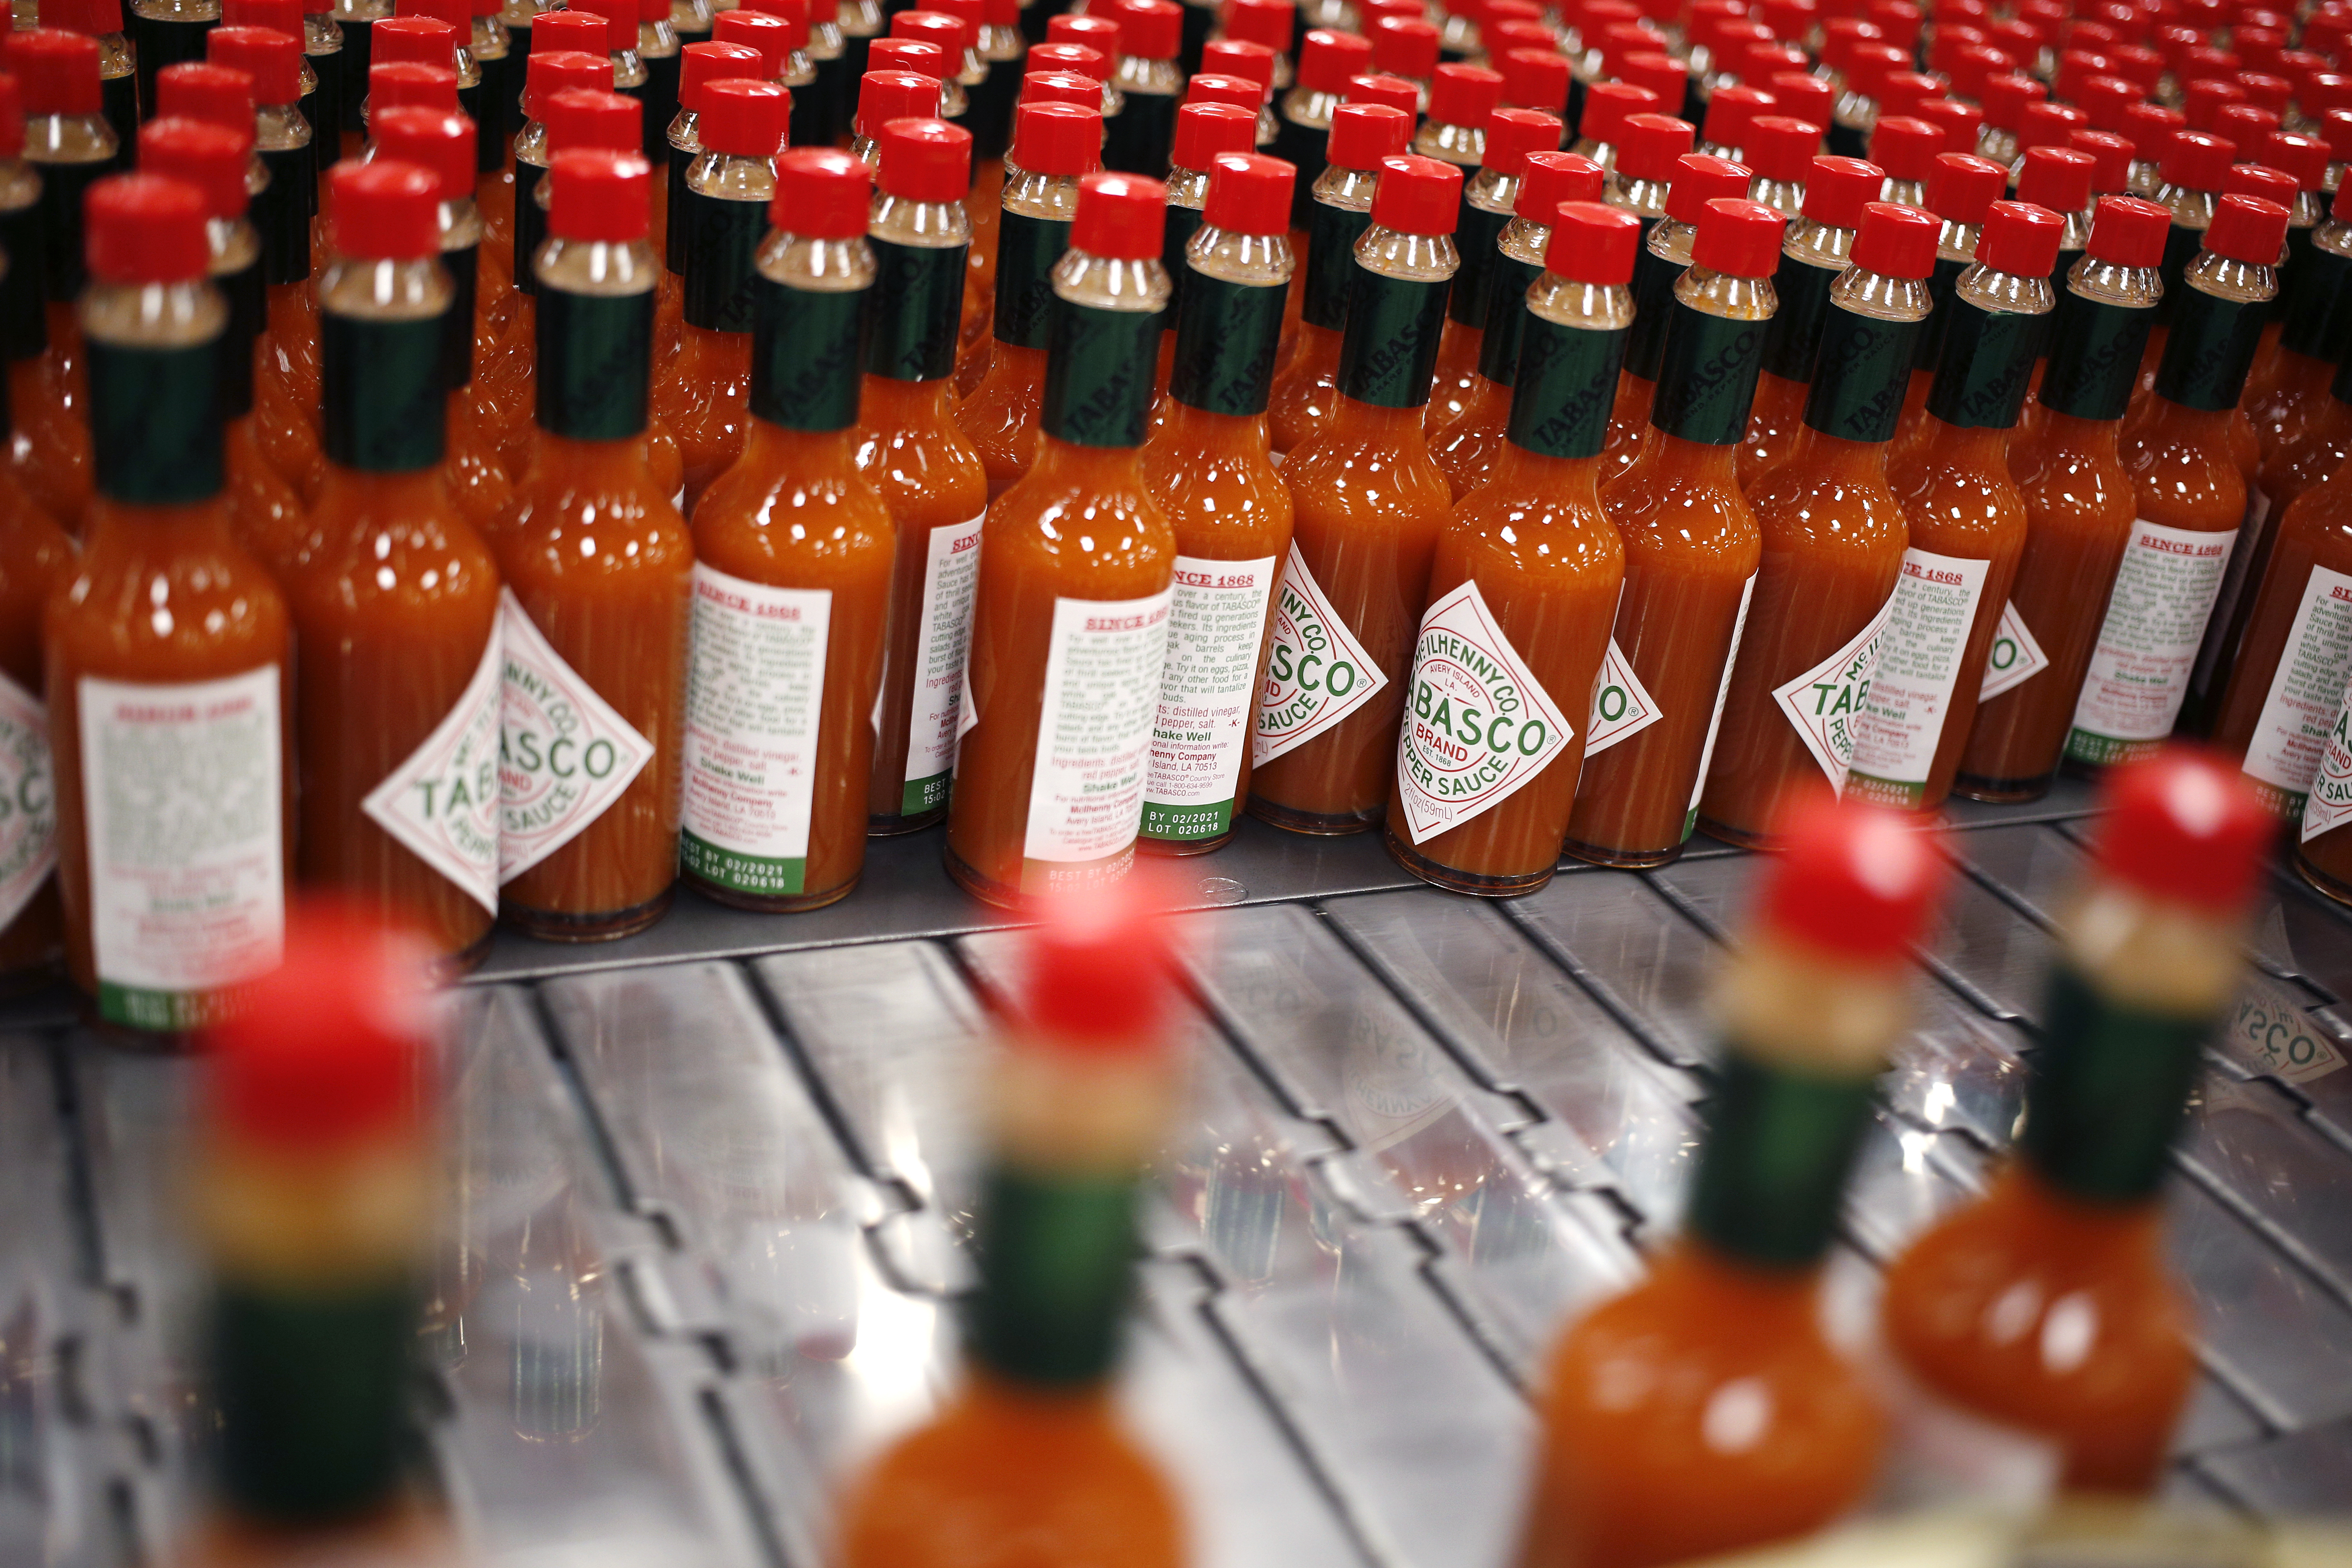 Bottles of Tabasco brand pepper sauce move down a production line at the McIlhenny Co. facility in Avery Island, Louisiana, U.S., on Tuesday, Feb. 6, 2018. Wholesale Inventories rose 0.4% in December, increasing to $612.1b from the prior month, according to the U.S. Census Bureau. Photographer: Luke Sharrett/Bloomberg via Getty Images